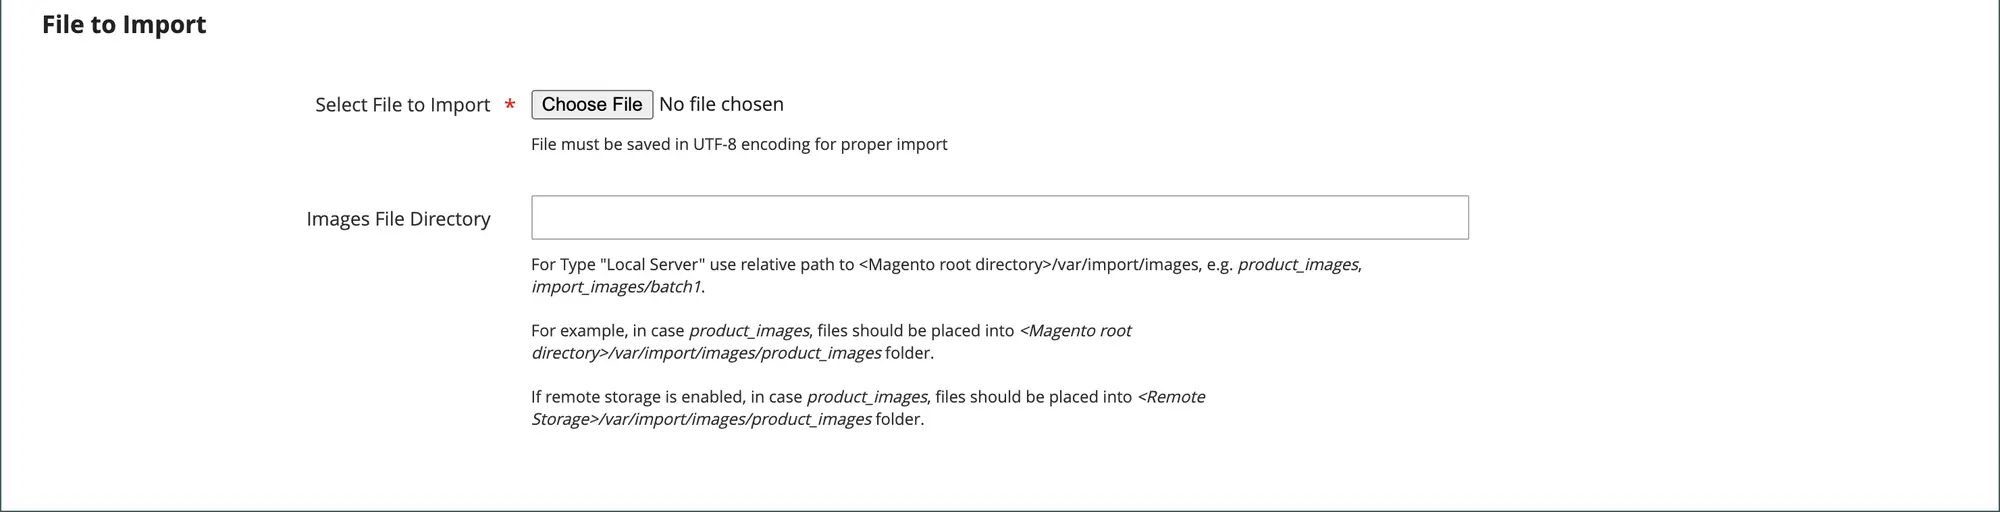 Data import images file directory